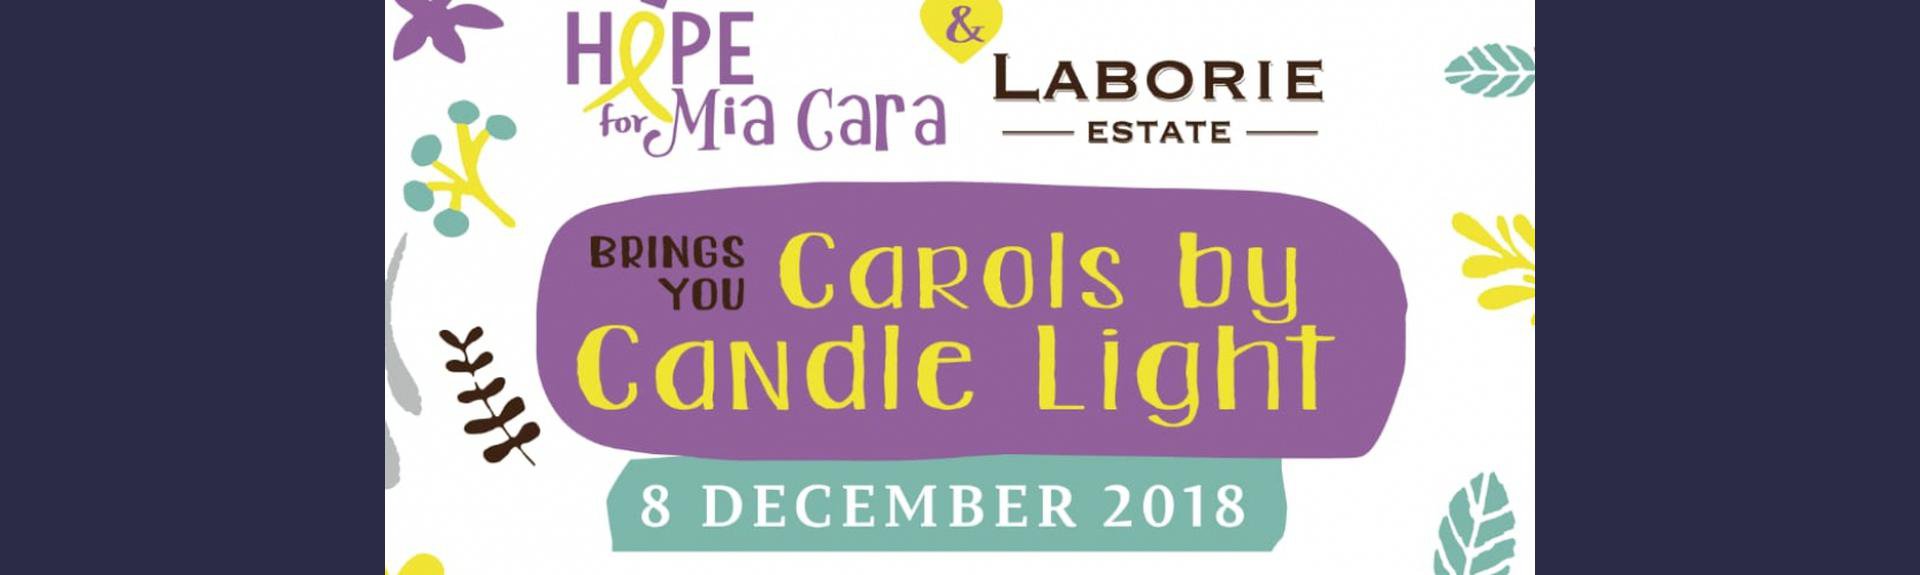 Hope for Mia Cara Carols by Candle Light